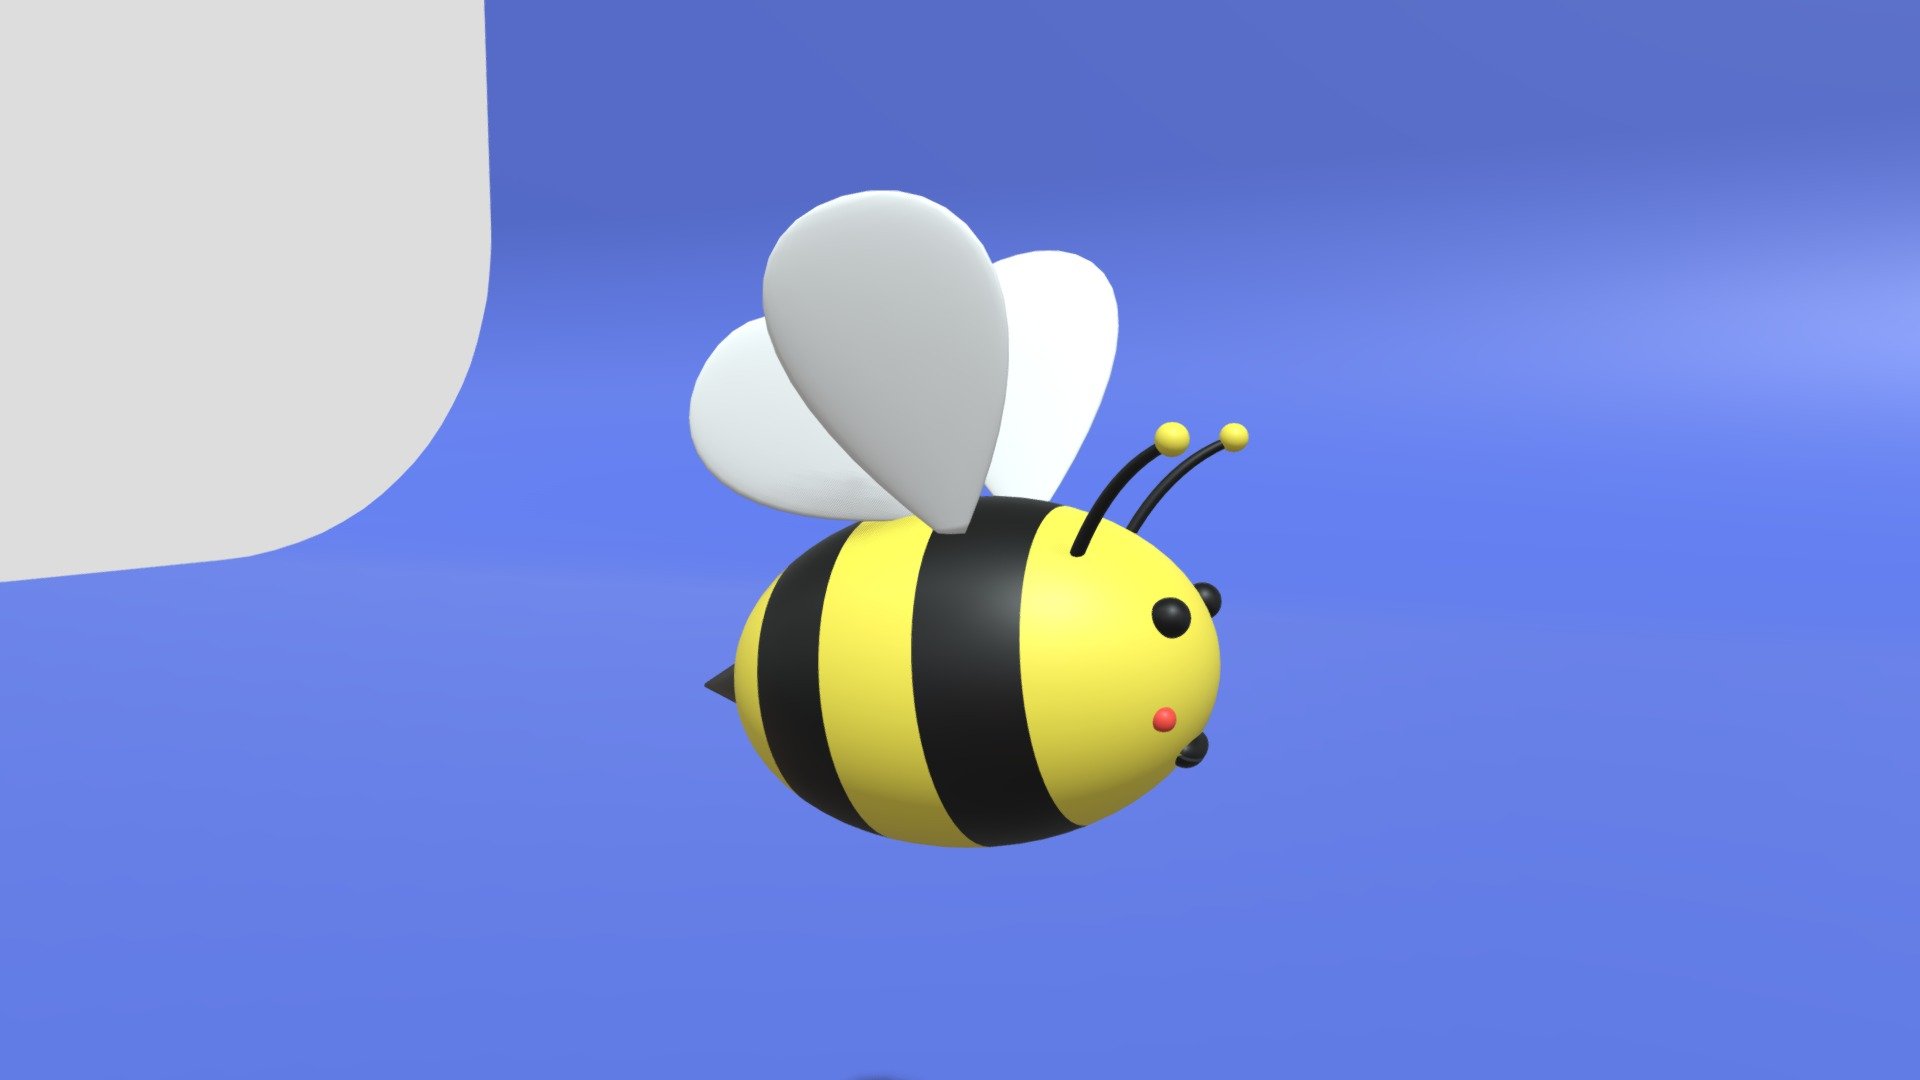 -Cute Cartoon Bee.

-This product contains 13 objects.

-Total vert: 7.895 poly: 8.071.

-Materials have the correct names.

-This product was created in Blender 2.8.

-Formats: blend, fbx, obj, c4d, dae, abc, stl, u4d glb, unity.

-We hope you enjoy this model.

-Thank you 3d model